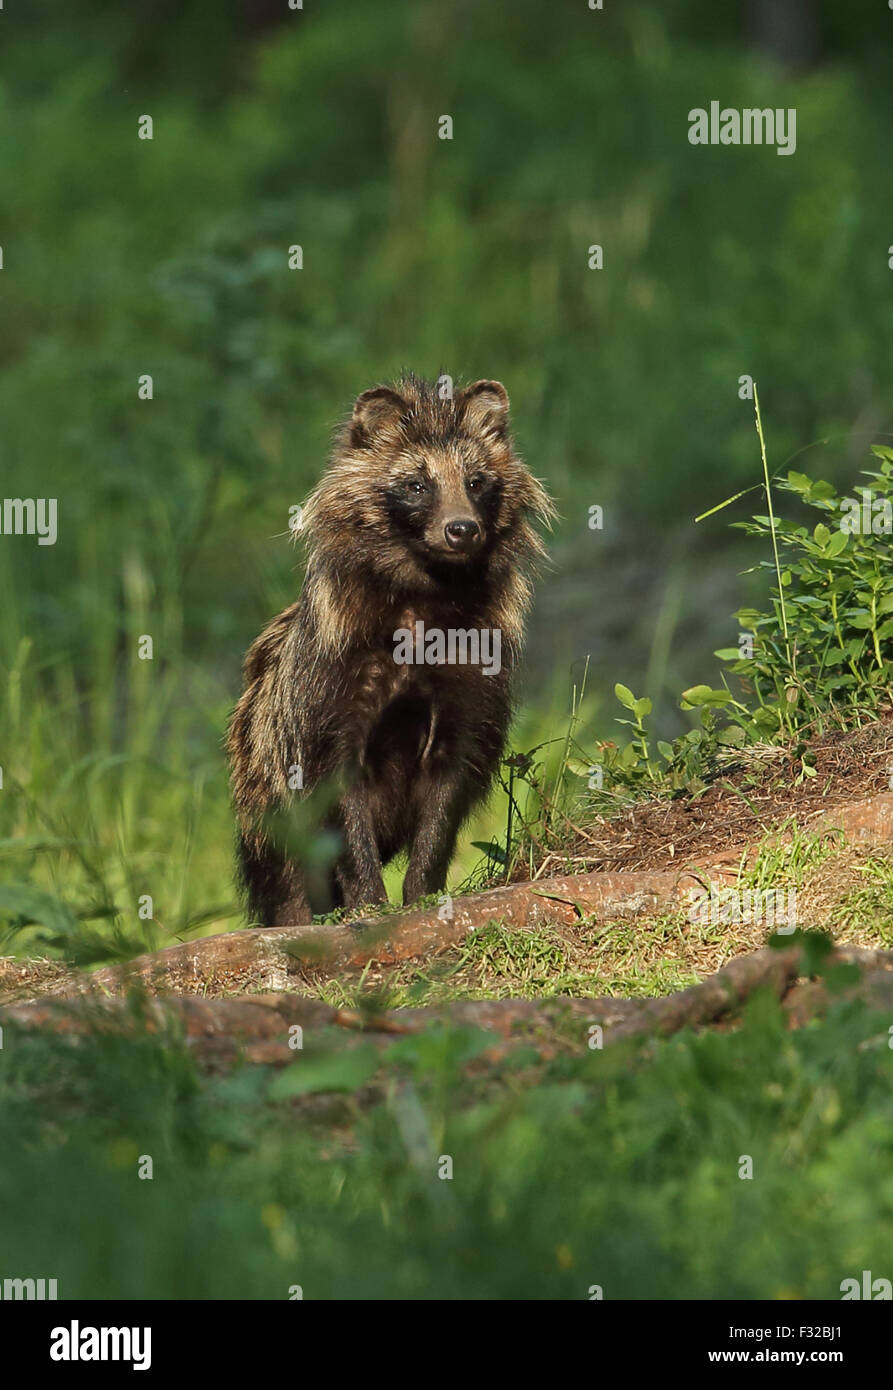 Raccoon-dog (Nyctereutes procyonoides ussuriensis) introduced species, adult, standing in forest clearing, Alutaguse Forest, Ida-Viru County, Estonia, June Stock Photo